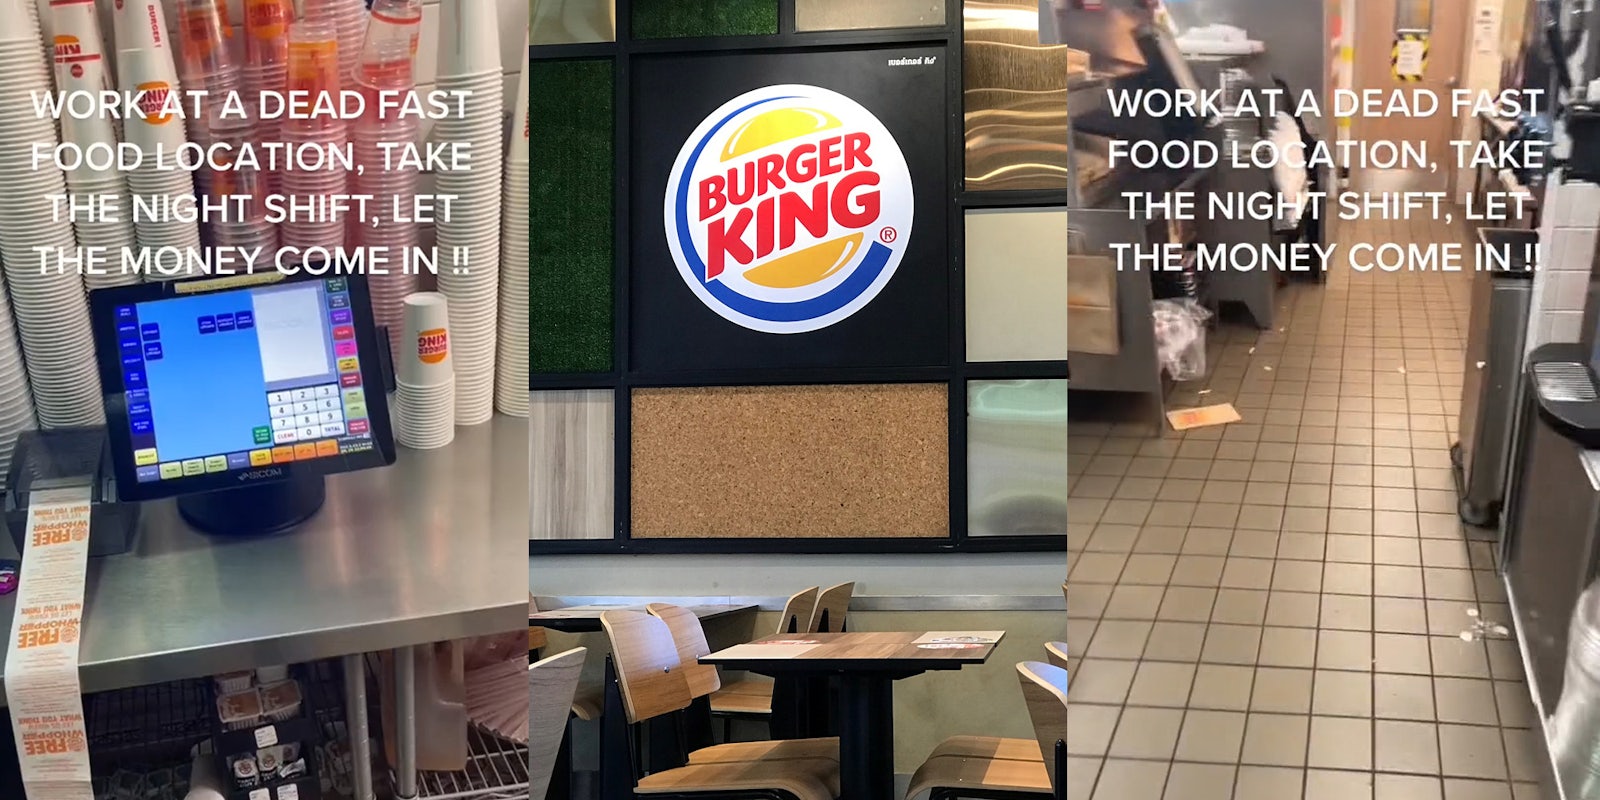 Burger King kitchen computer printing receipts caption 'WORK AT A DEAD FAST FOOD LOCATION, TAKE THE NIGHT SHIFT, LET THE MONEY COME IN!!' (l) Burger King sign with empty seats below (c) Burger King kitchen caption 'WORK AT A DEAD FAST FOOD LOCATION, TAKE THE NIGHT SHIFT, LET THE MONEY COME IN!!' (r)